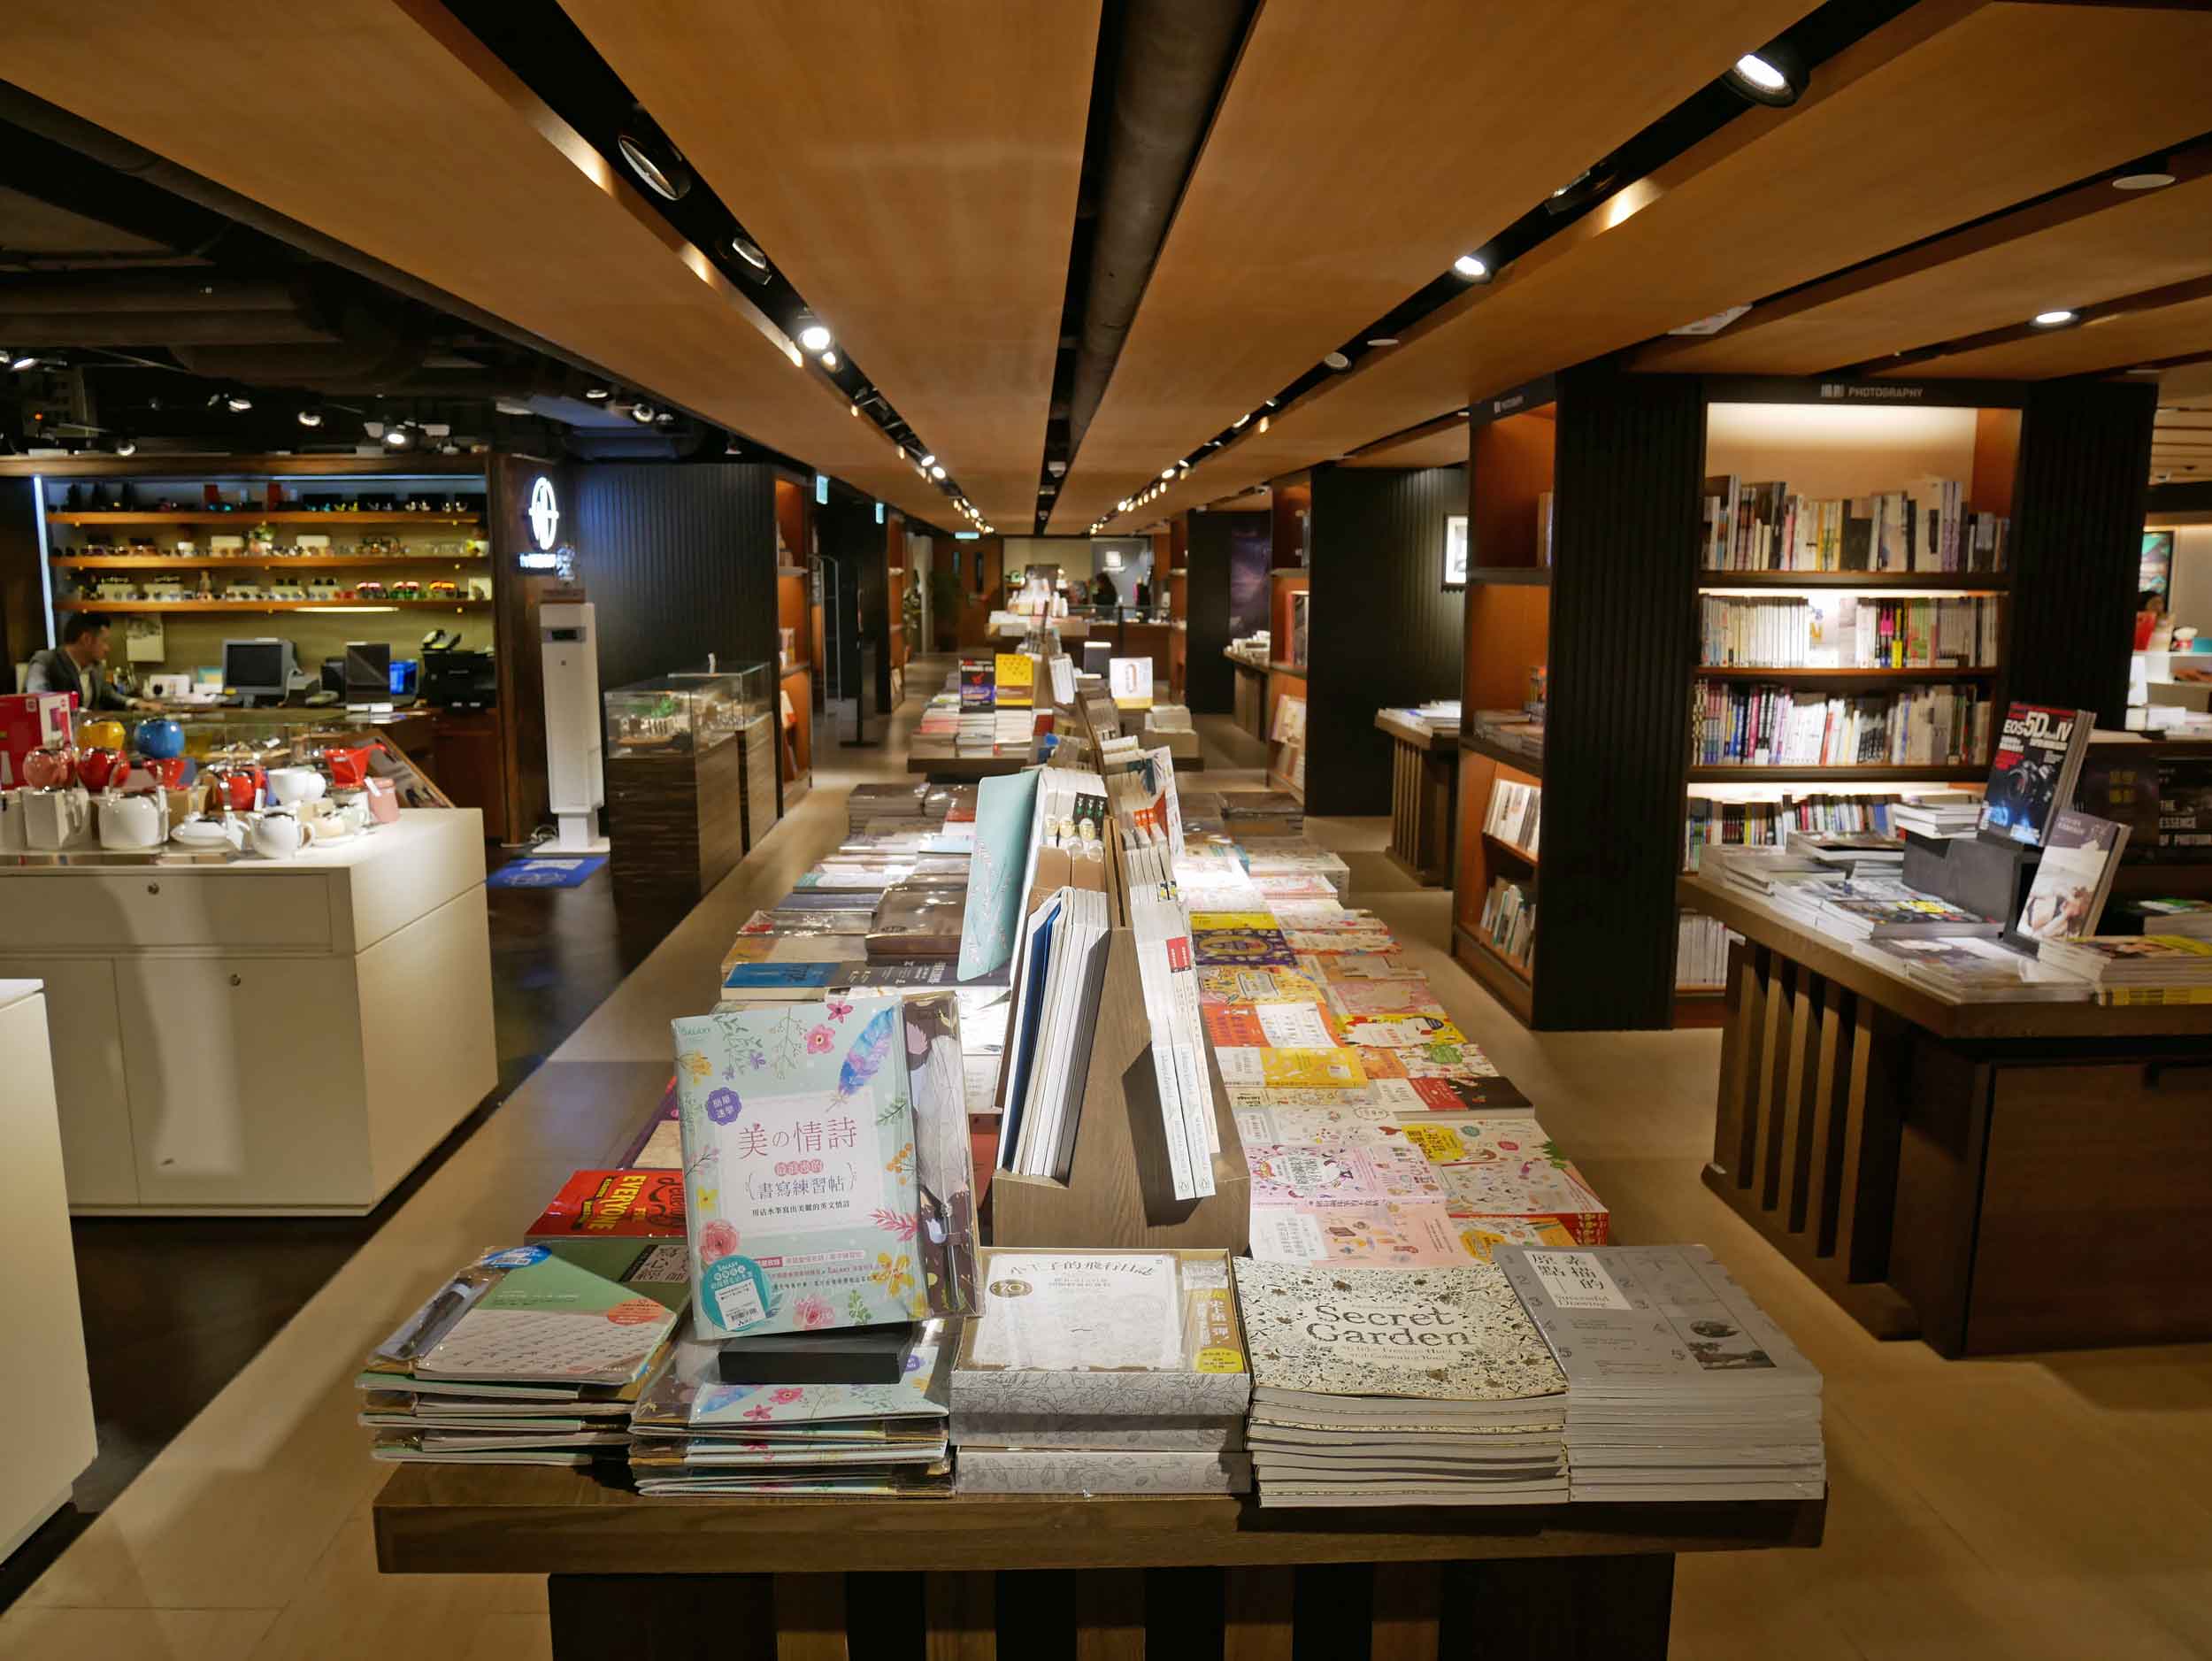  Once we made it to Kowloon, we wandered through the stacks and shops of Eslite bookstore. 